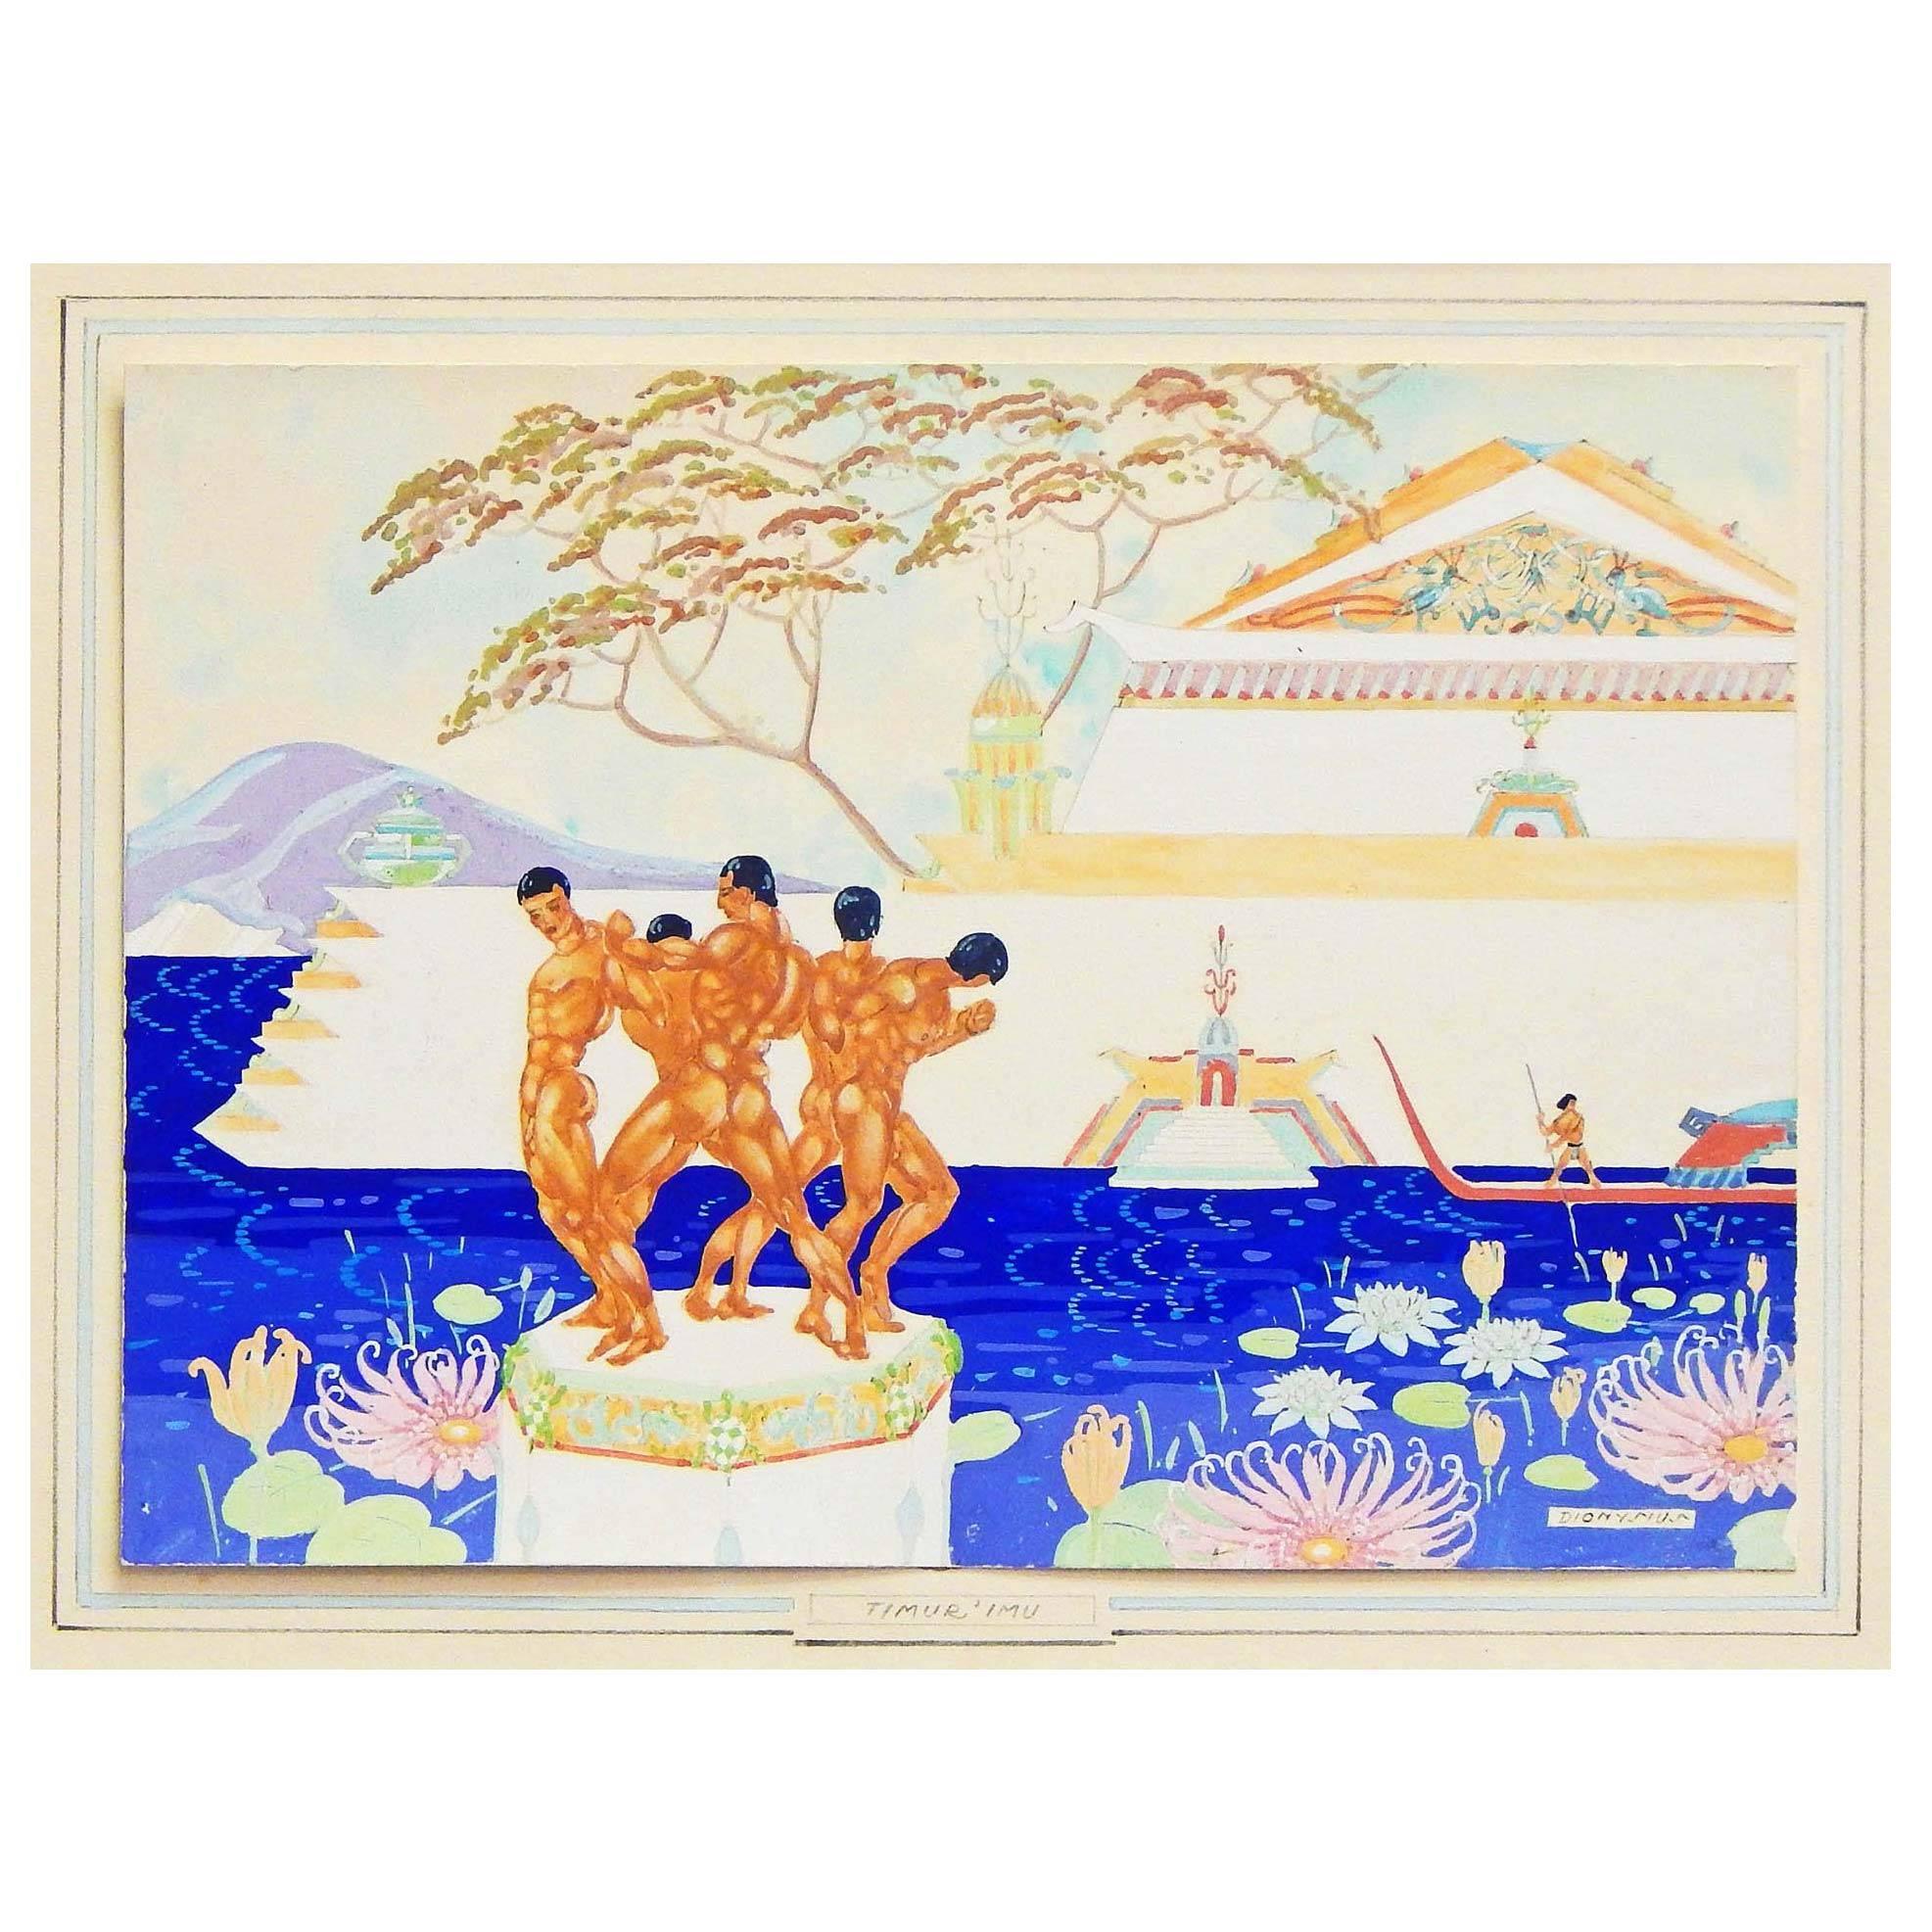 "Timur 'Imu, " Exotic Asian Fantasy, Art Deco Painting with Male Nudes For Sale